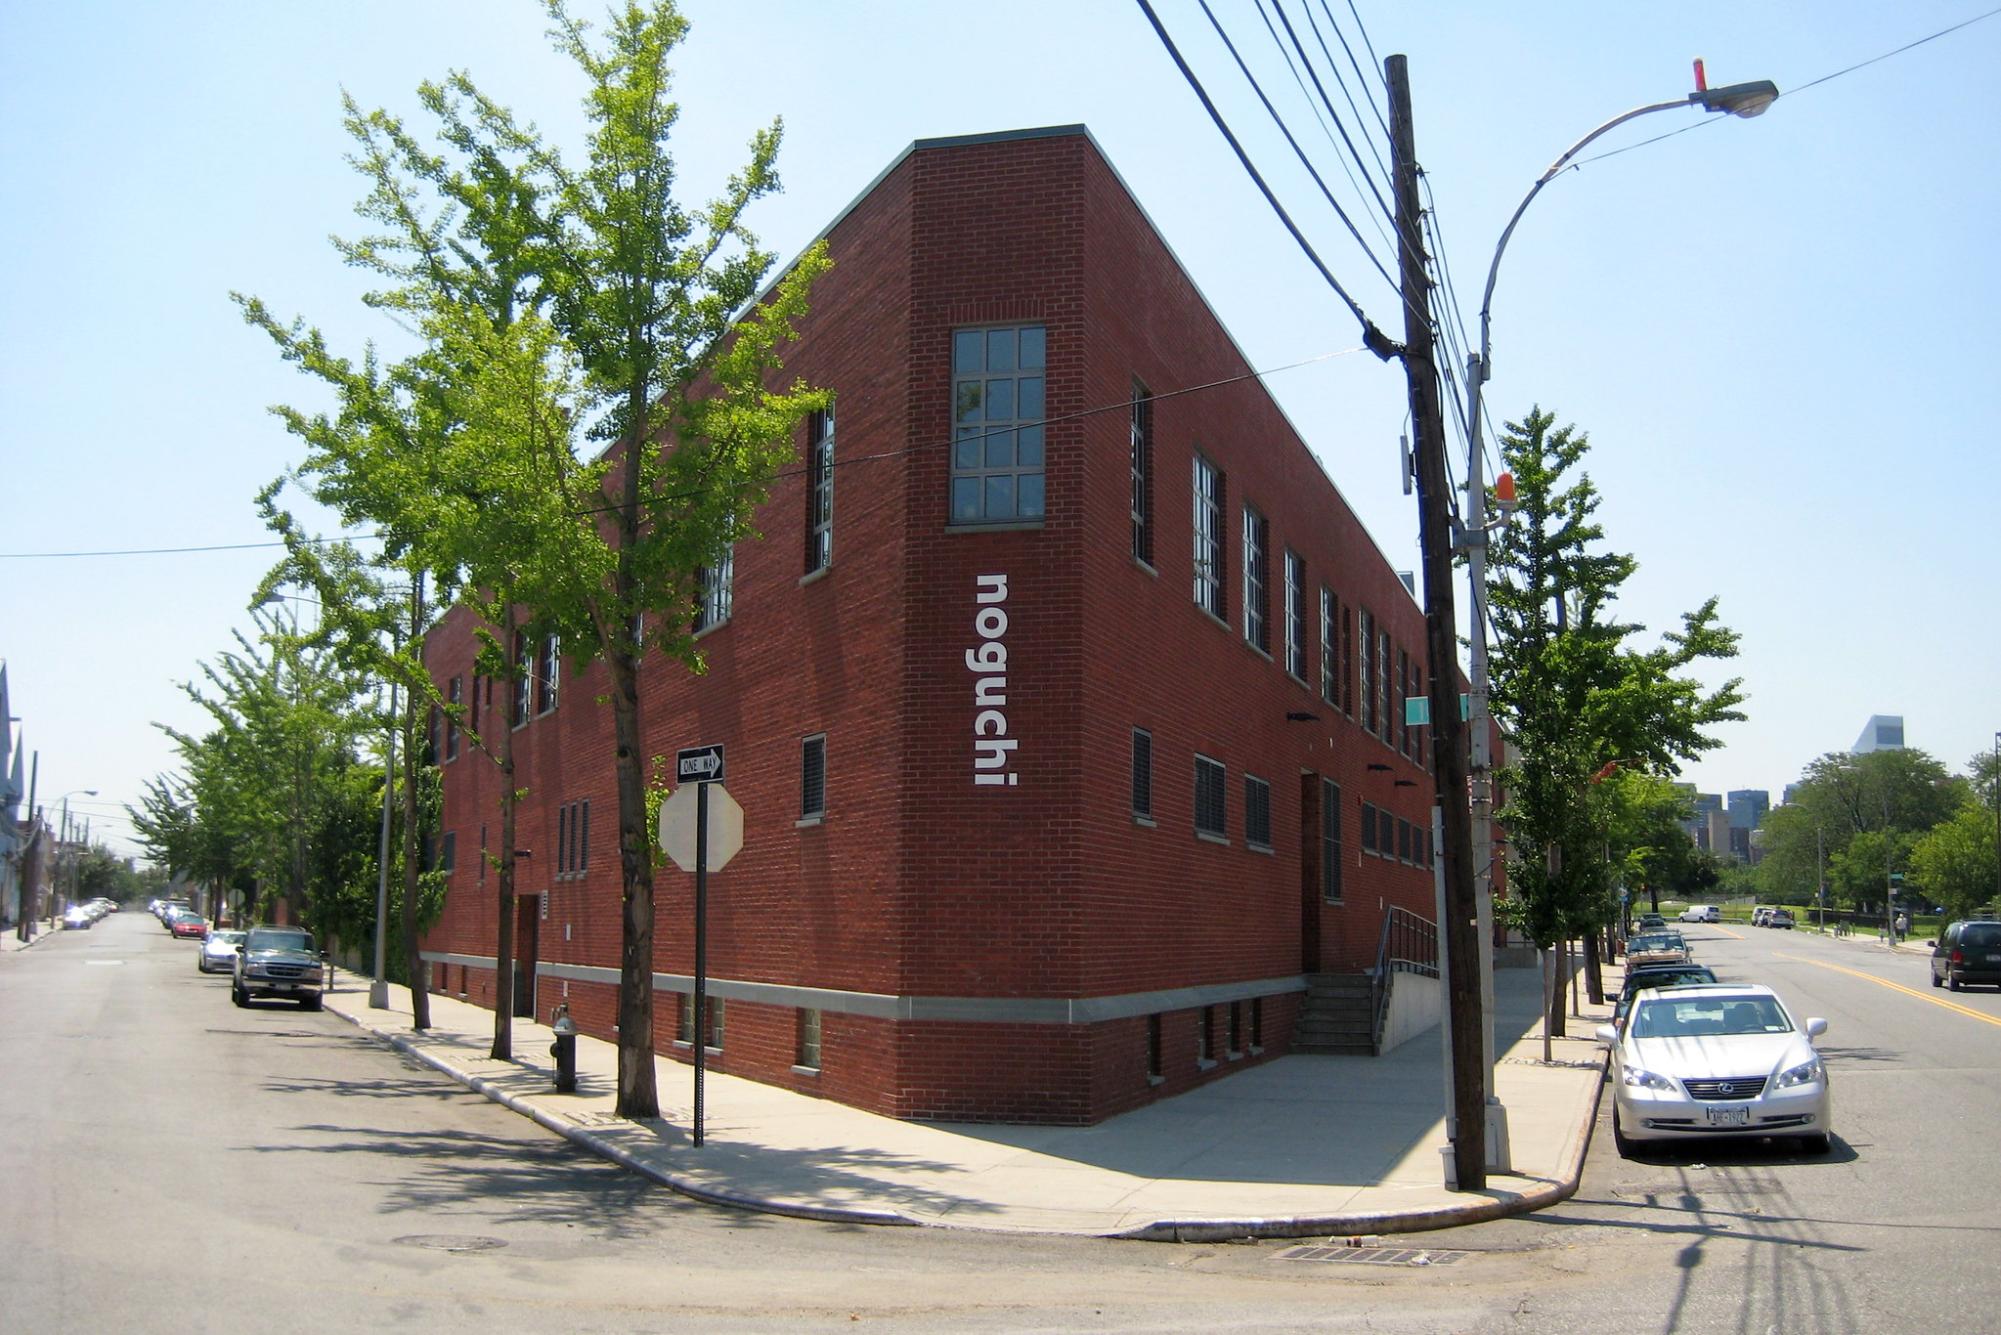 The exterior of The Noguchi Museum which is a red brick building with the word “noguchi” in white letters along the side.